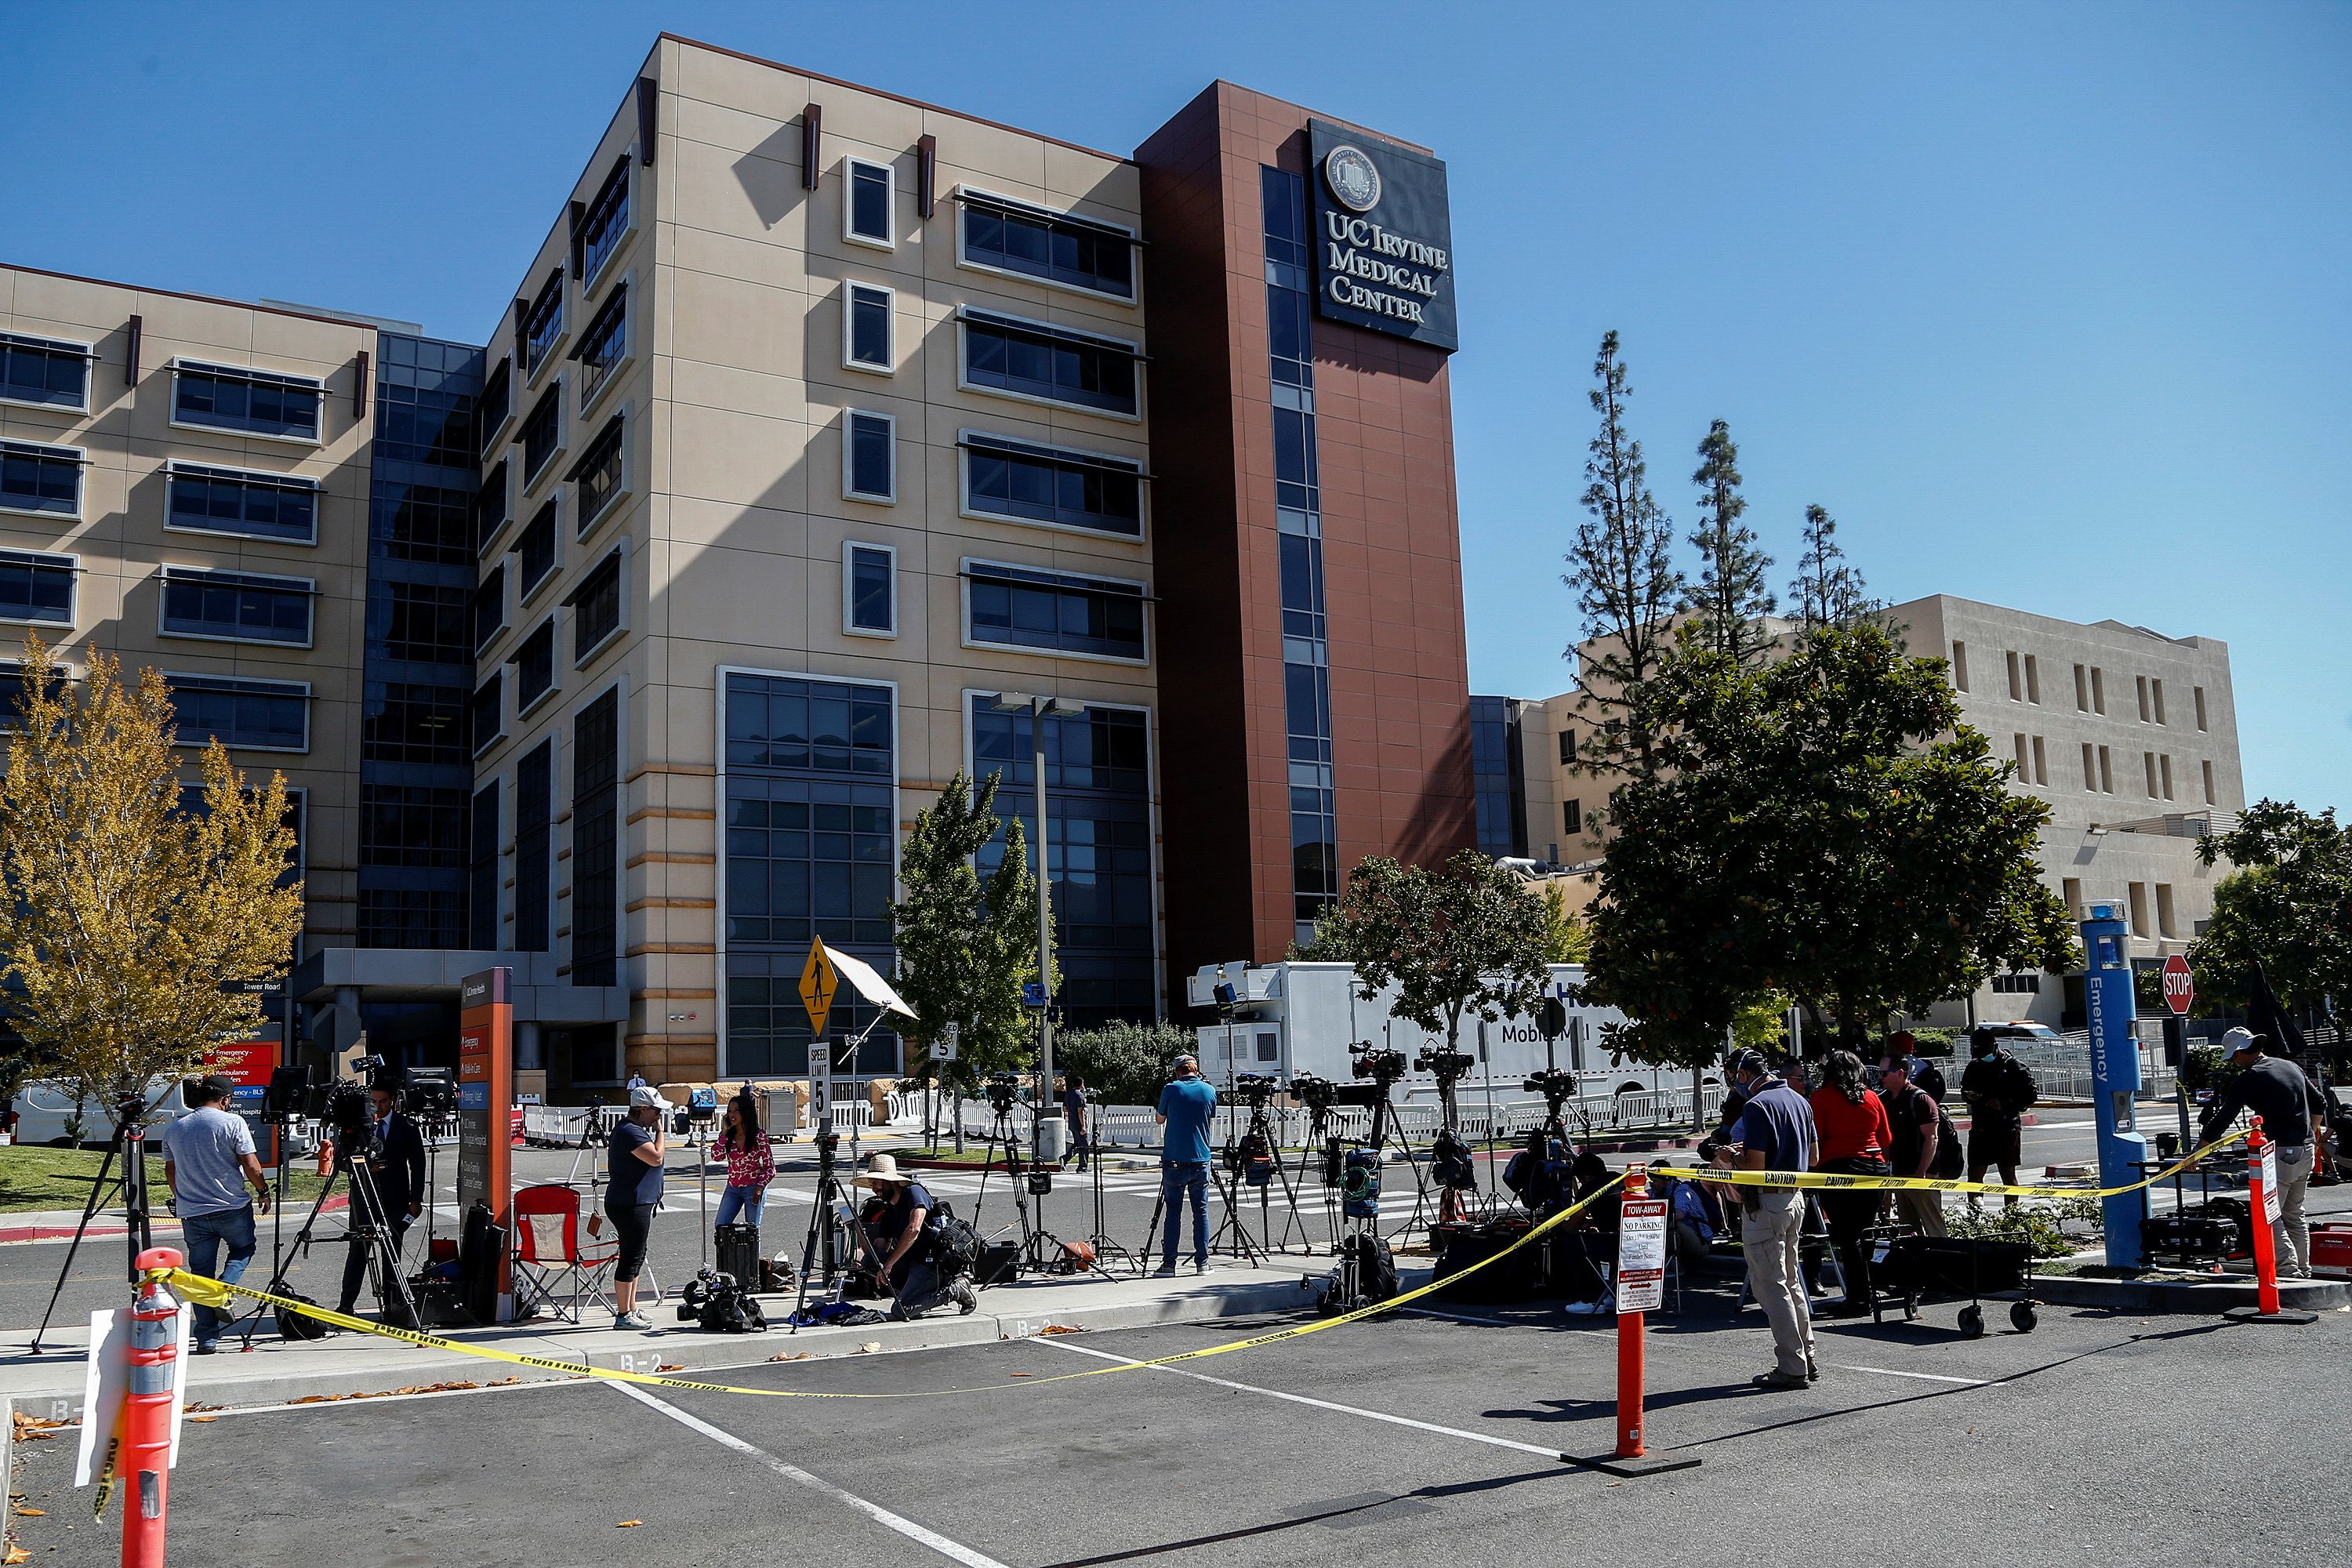 Members of media wait outside University of California Irvine Medical Center after it was announced that former U.S. President Bill Clinton was admitted to the hospital in Orange, California, U.S. October 15, 2021. REUTERS/Ringo Chiu